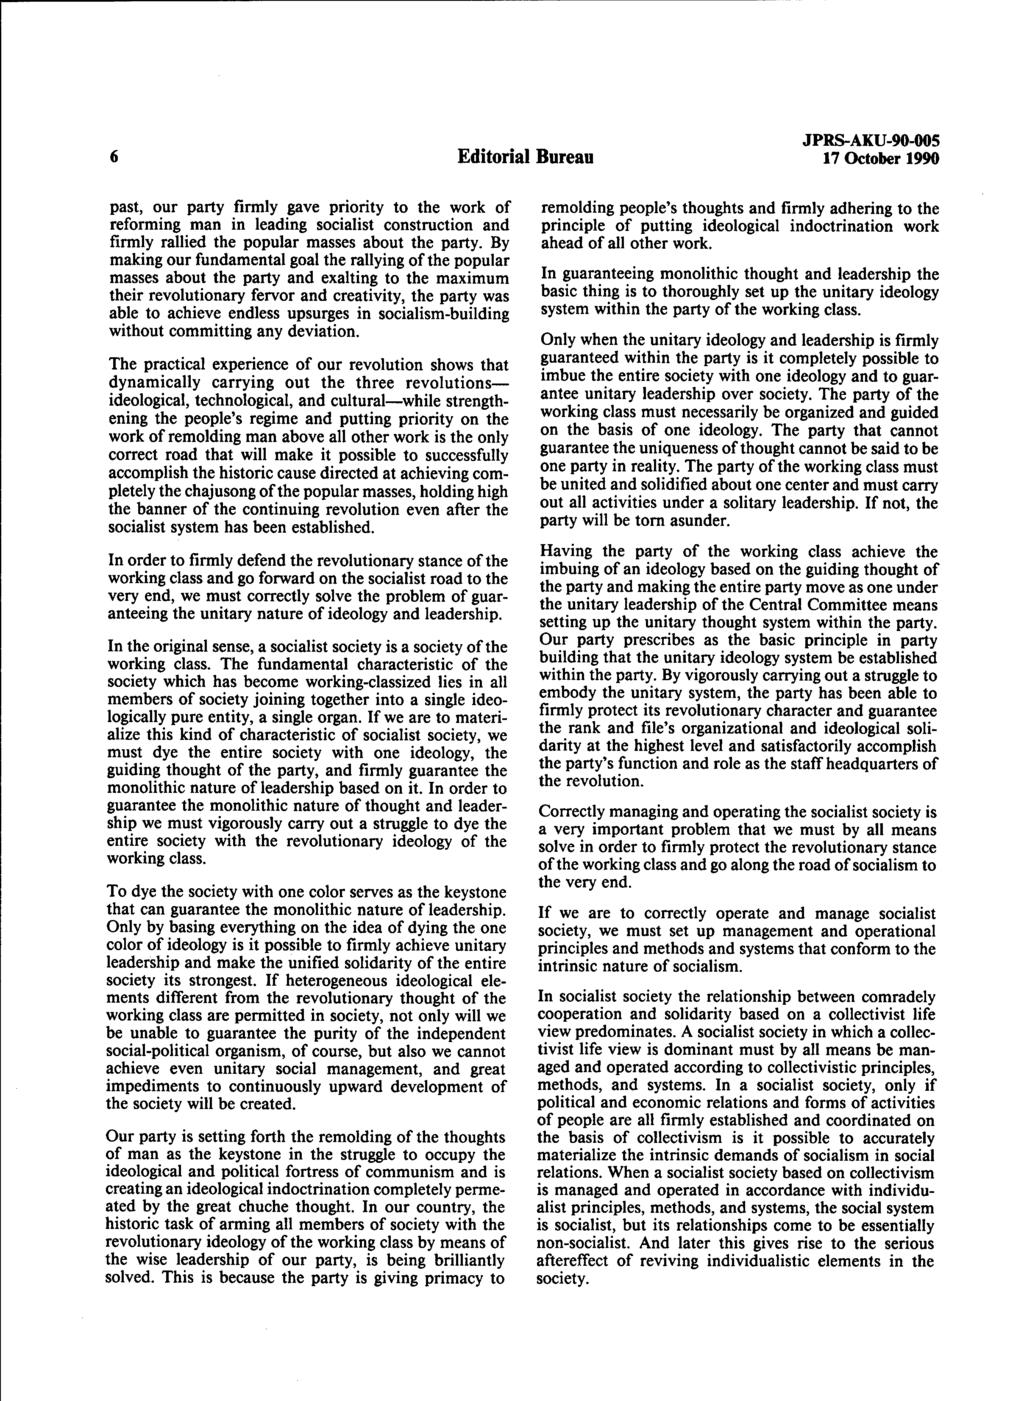 Editorial Bureau JPRS-AKU-90-005 17 October 1990 past, our party firmly gave priority to the work of reforming man in leading socialist construction and firmly rallied the popular masses about the